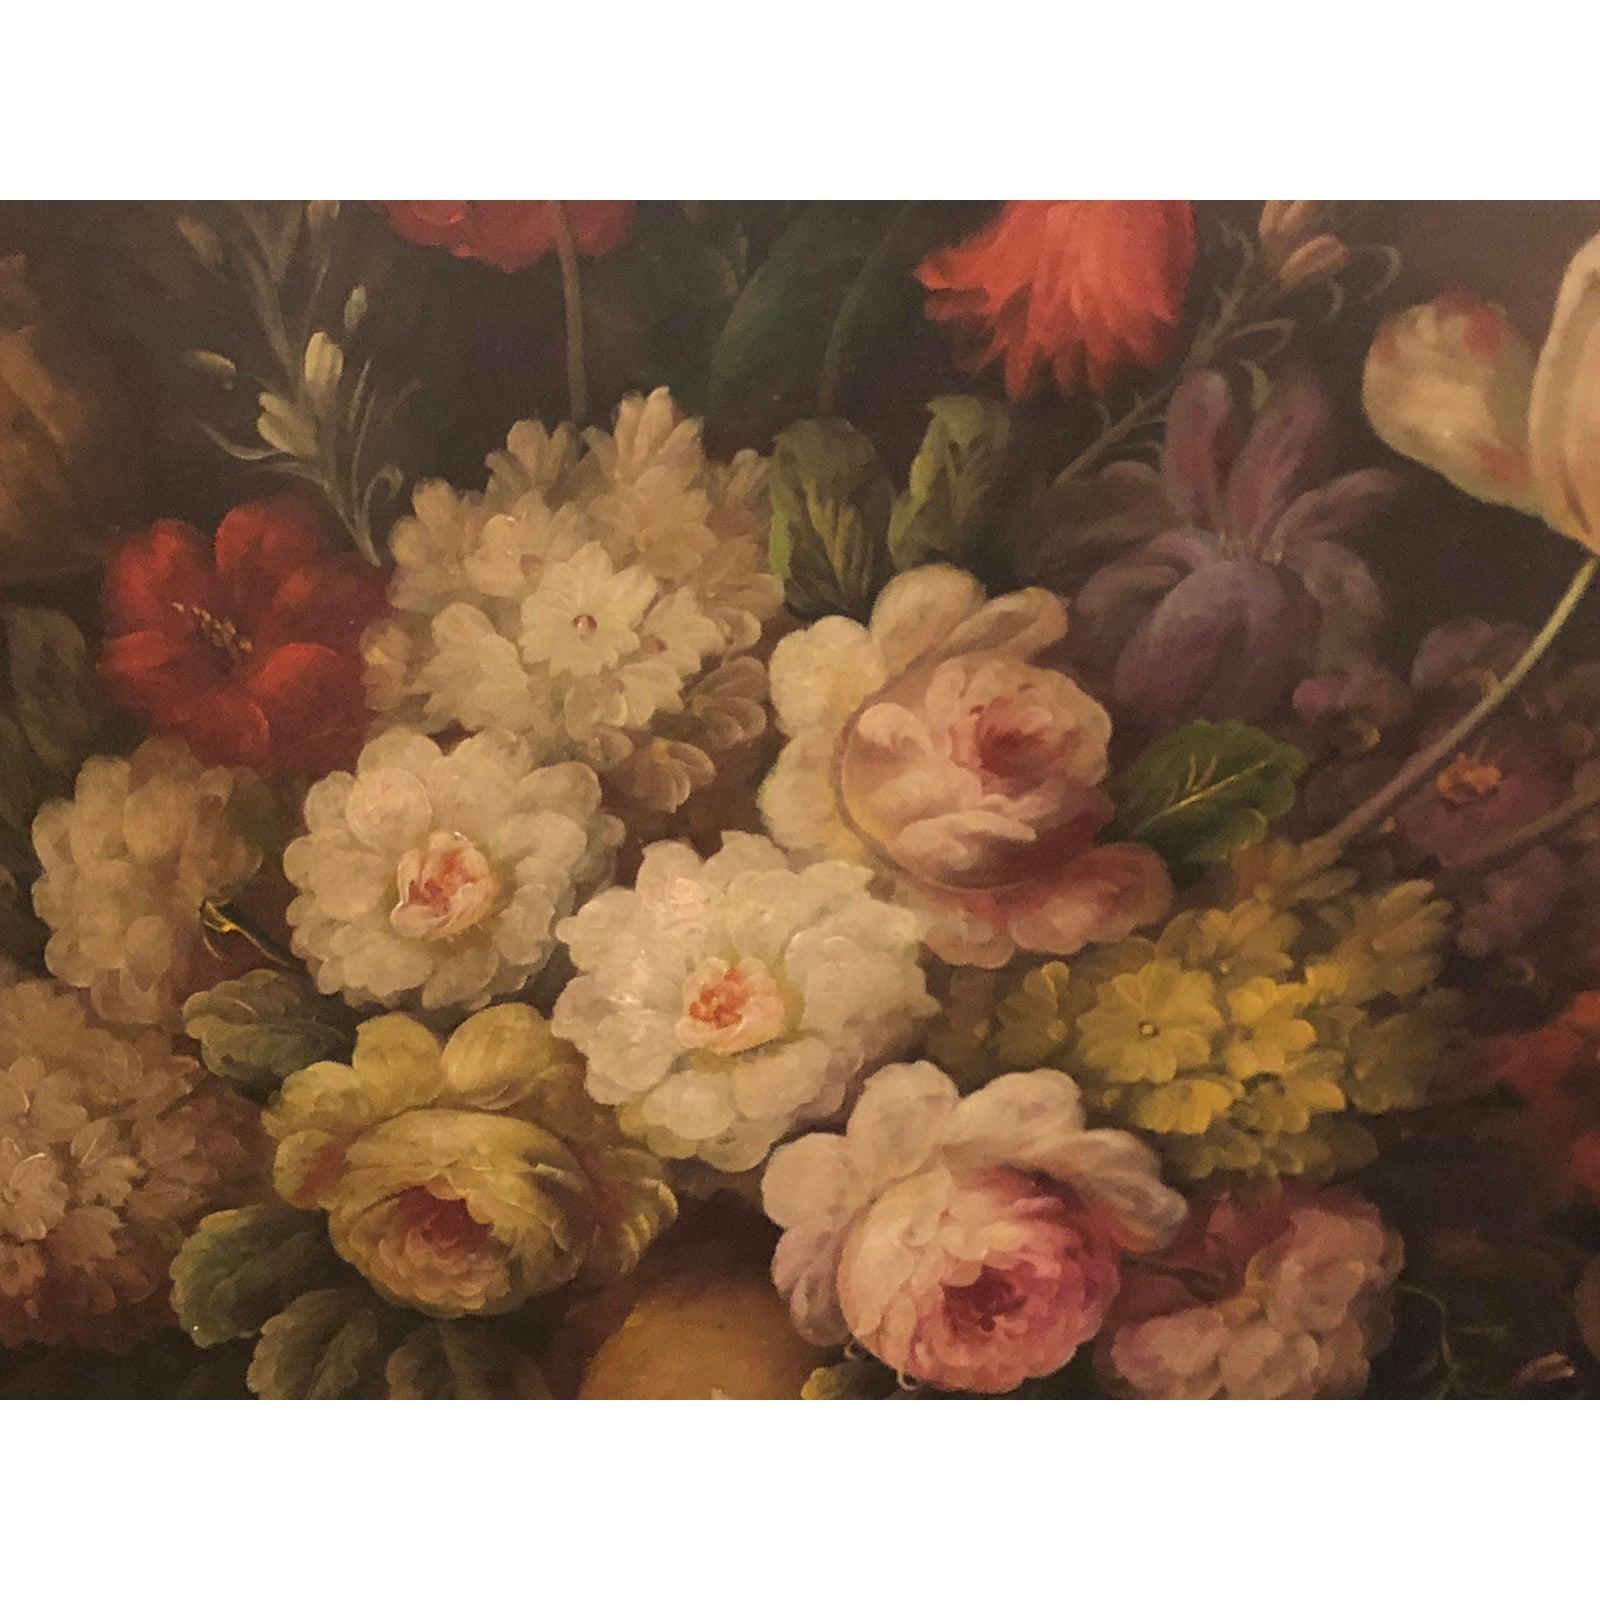 Classical Flower Vase Still Life Painting Oil on Canvas After Rodger Godchaux 2